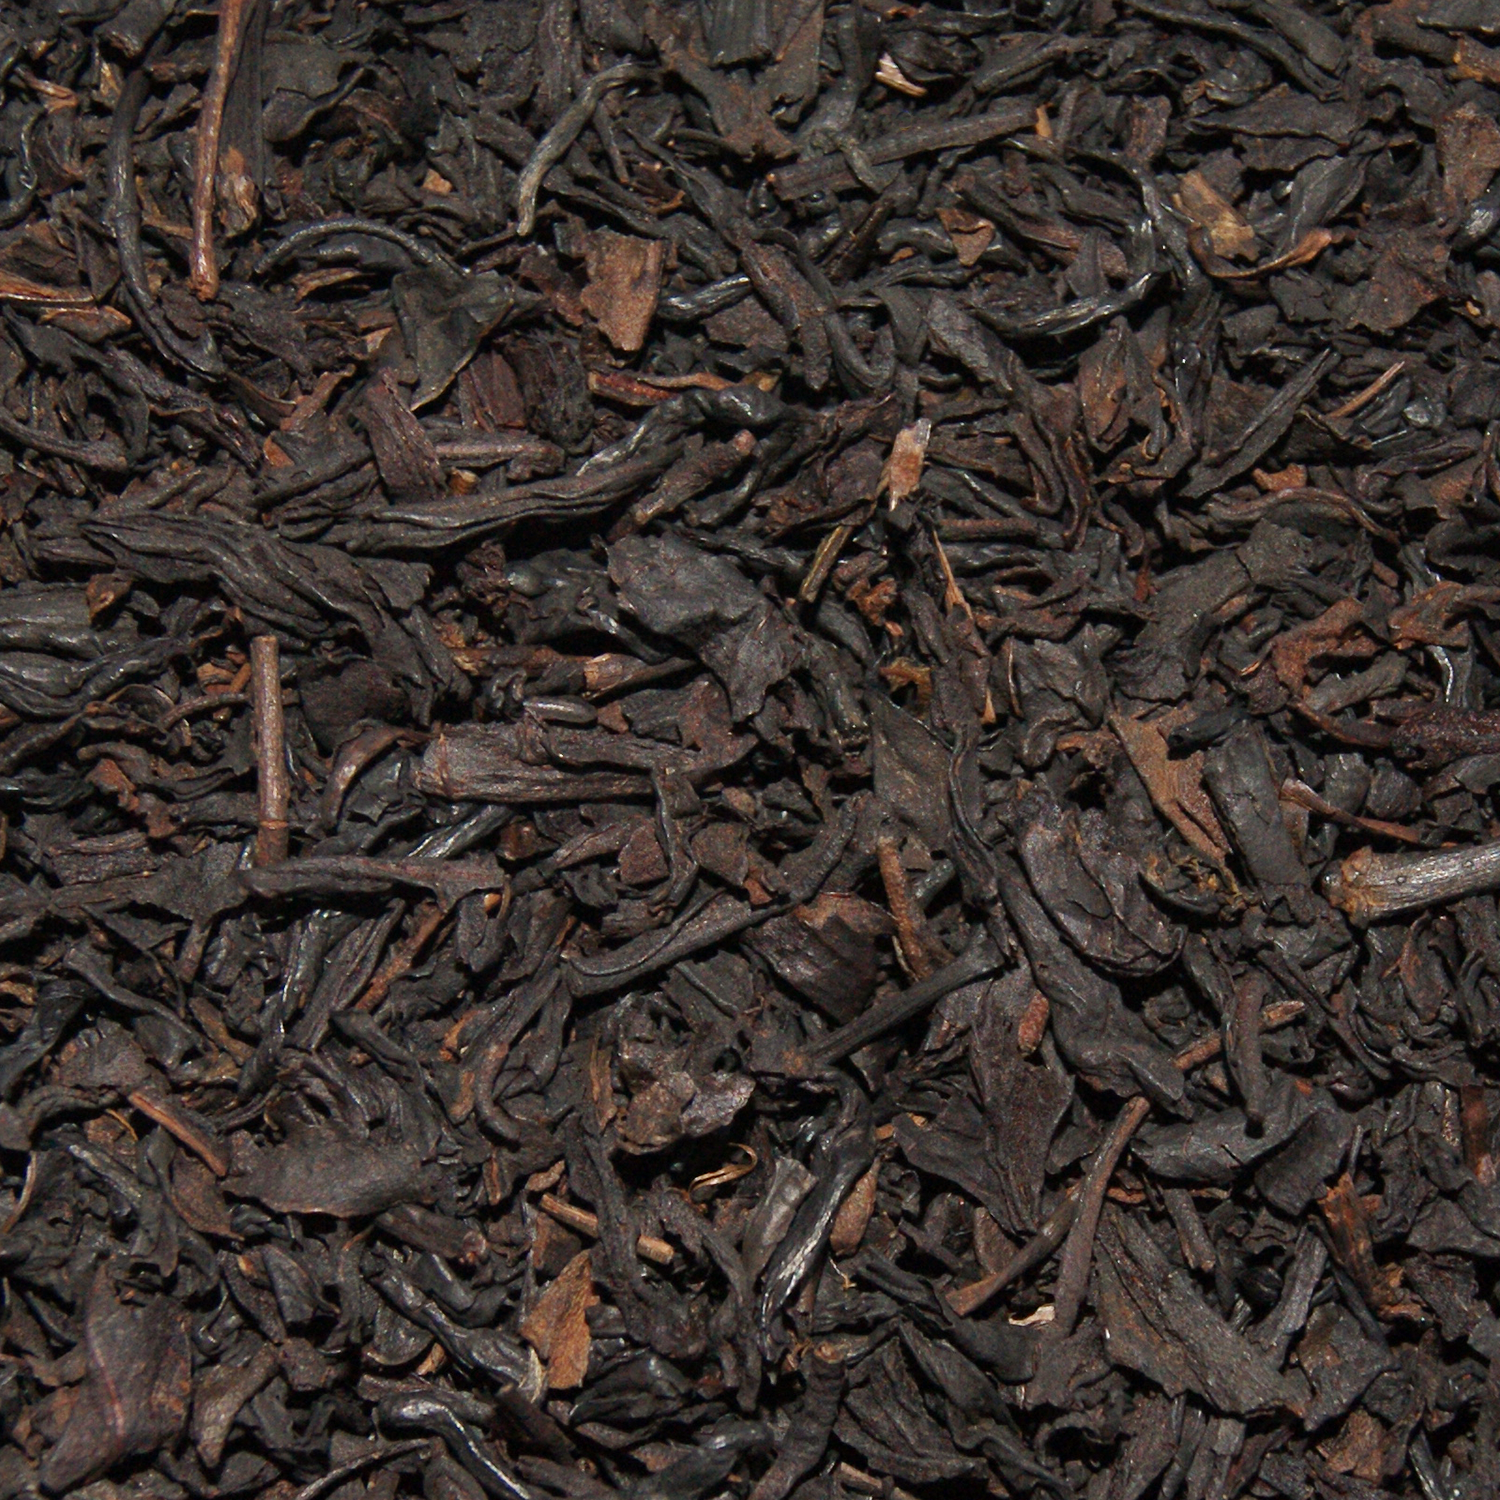 Formosa Tarry Lapsang Souchong 100 g